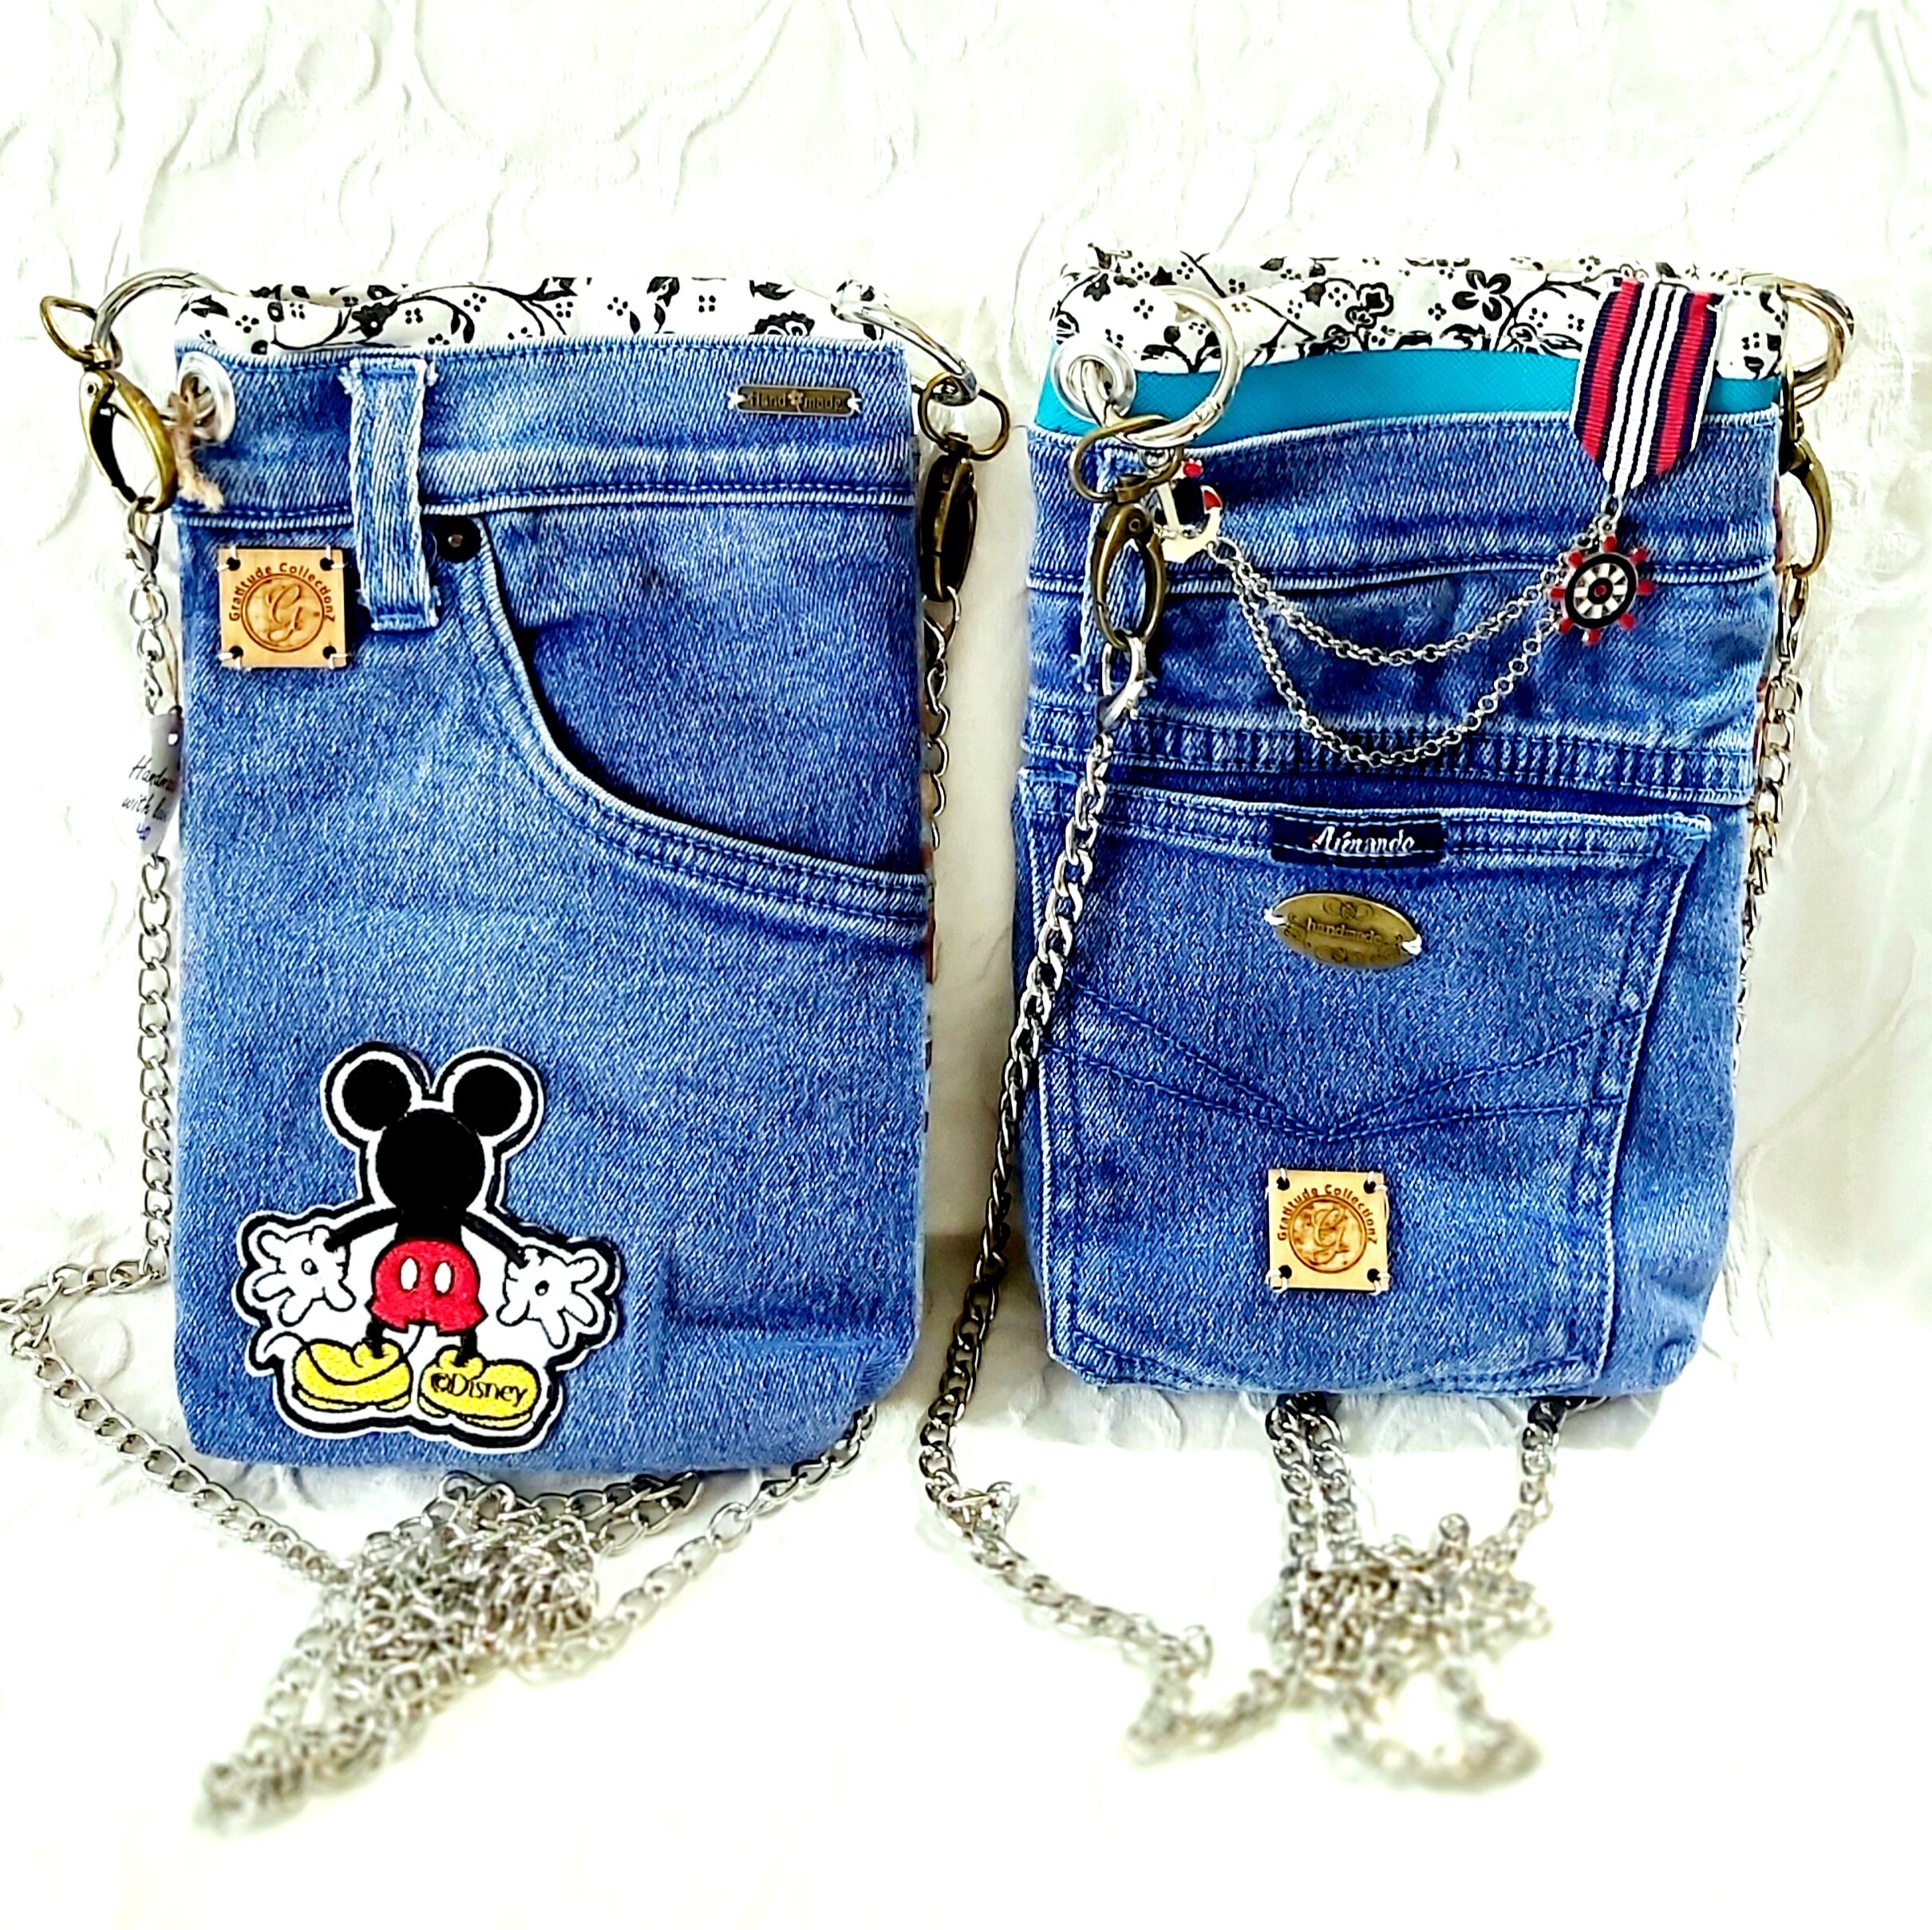 Upcycled Denim Fanny pack/Waist pouch- light blue